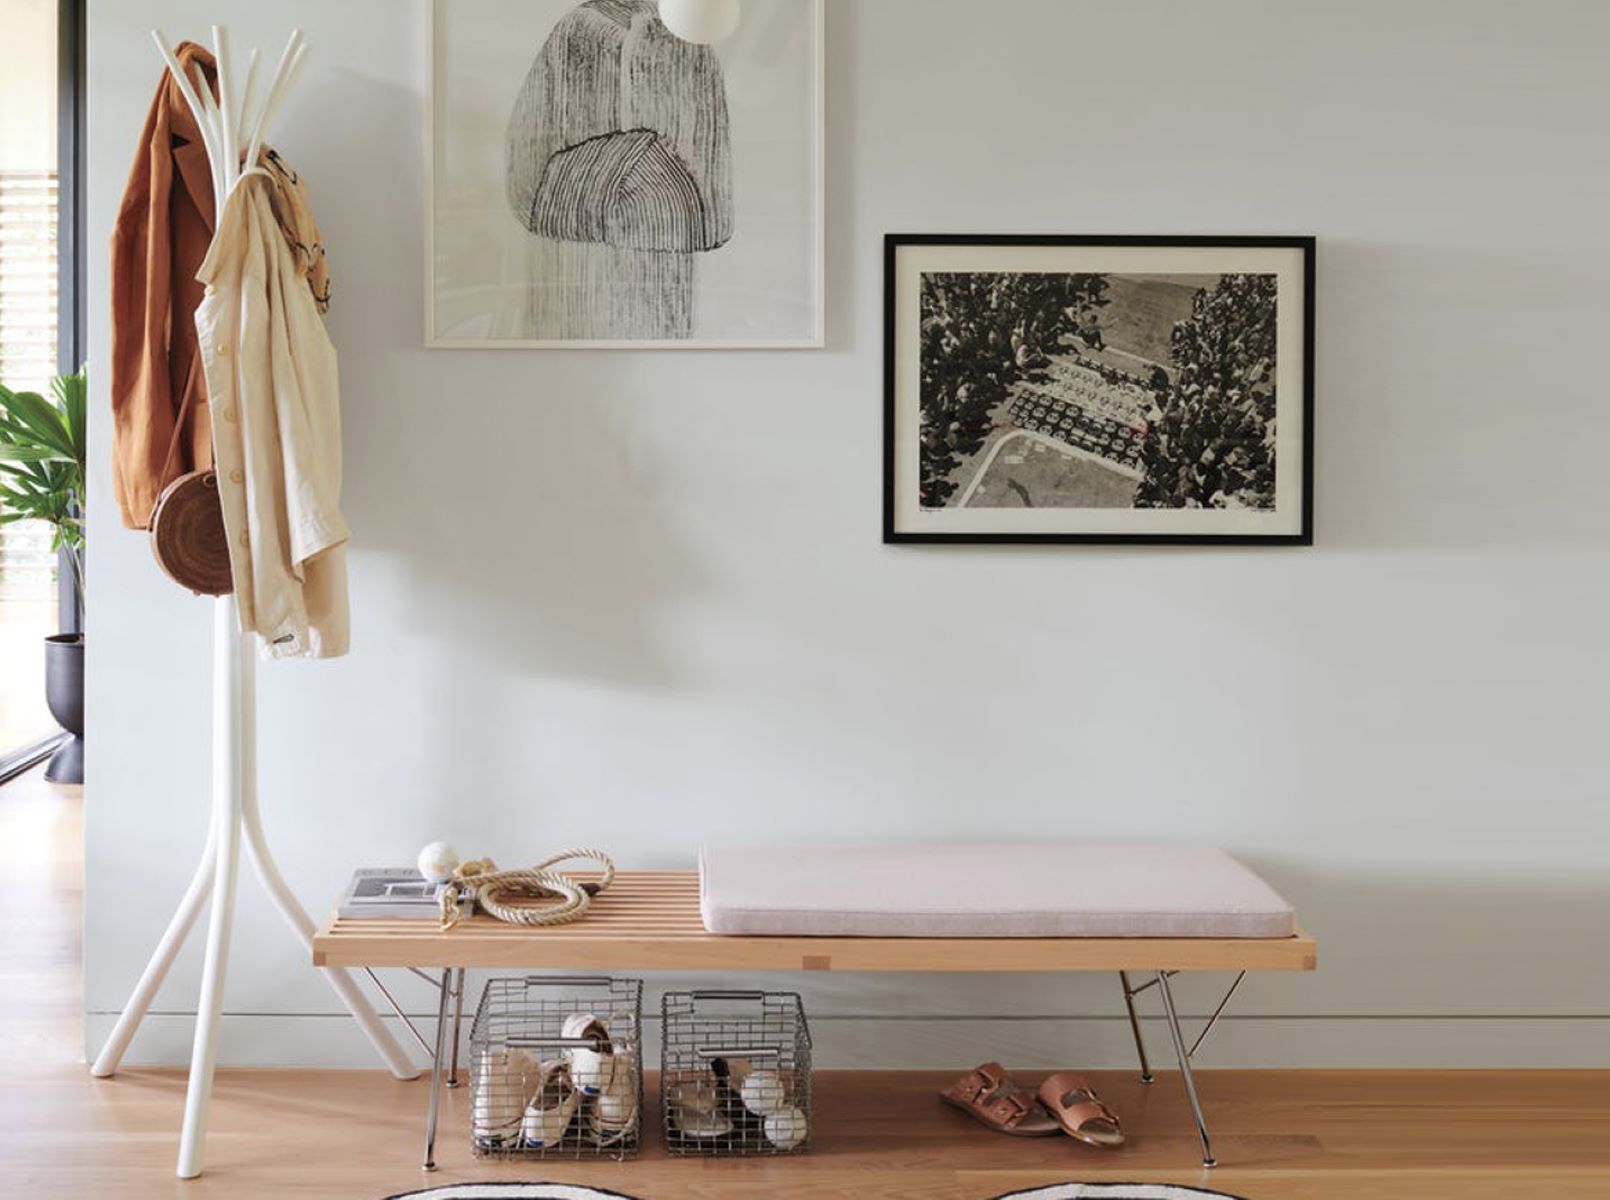 How To Make A Standing Coat Rack